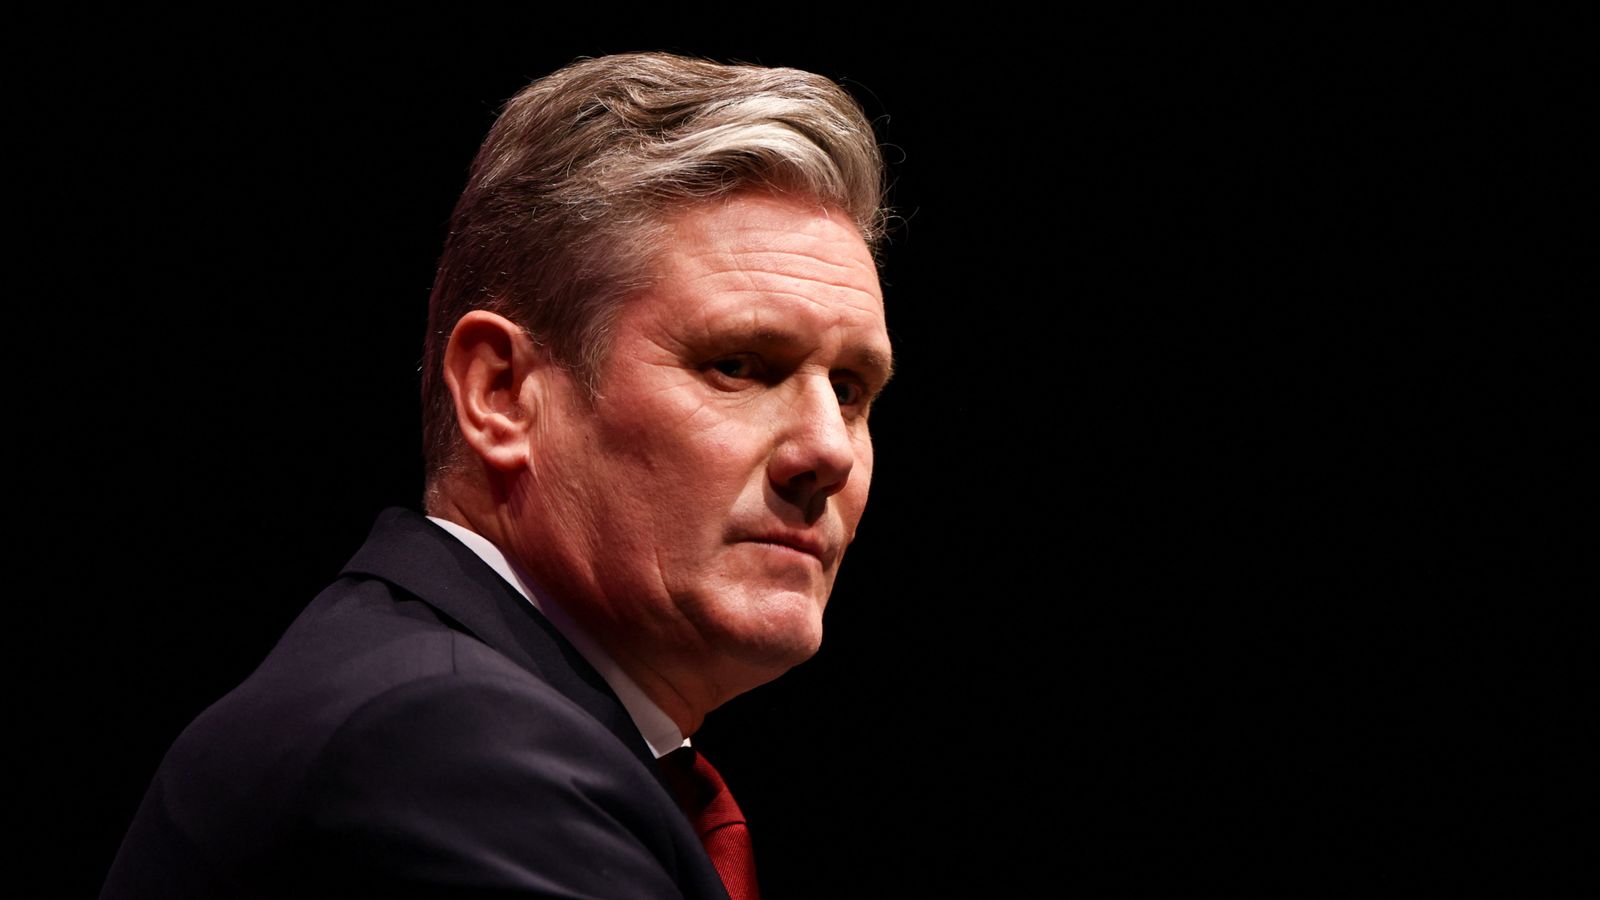 Few ever believed Sir Keir Starmer could become PM - an extraordinary set of events changed all of that